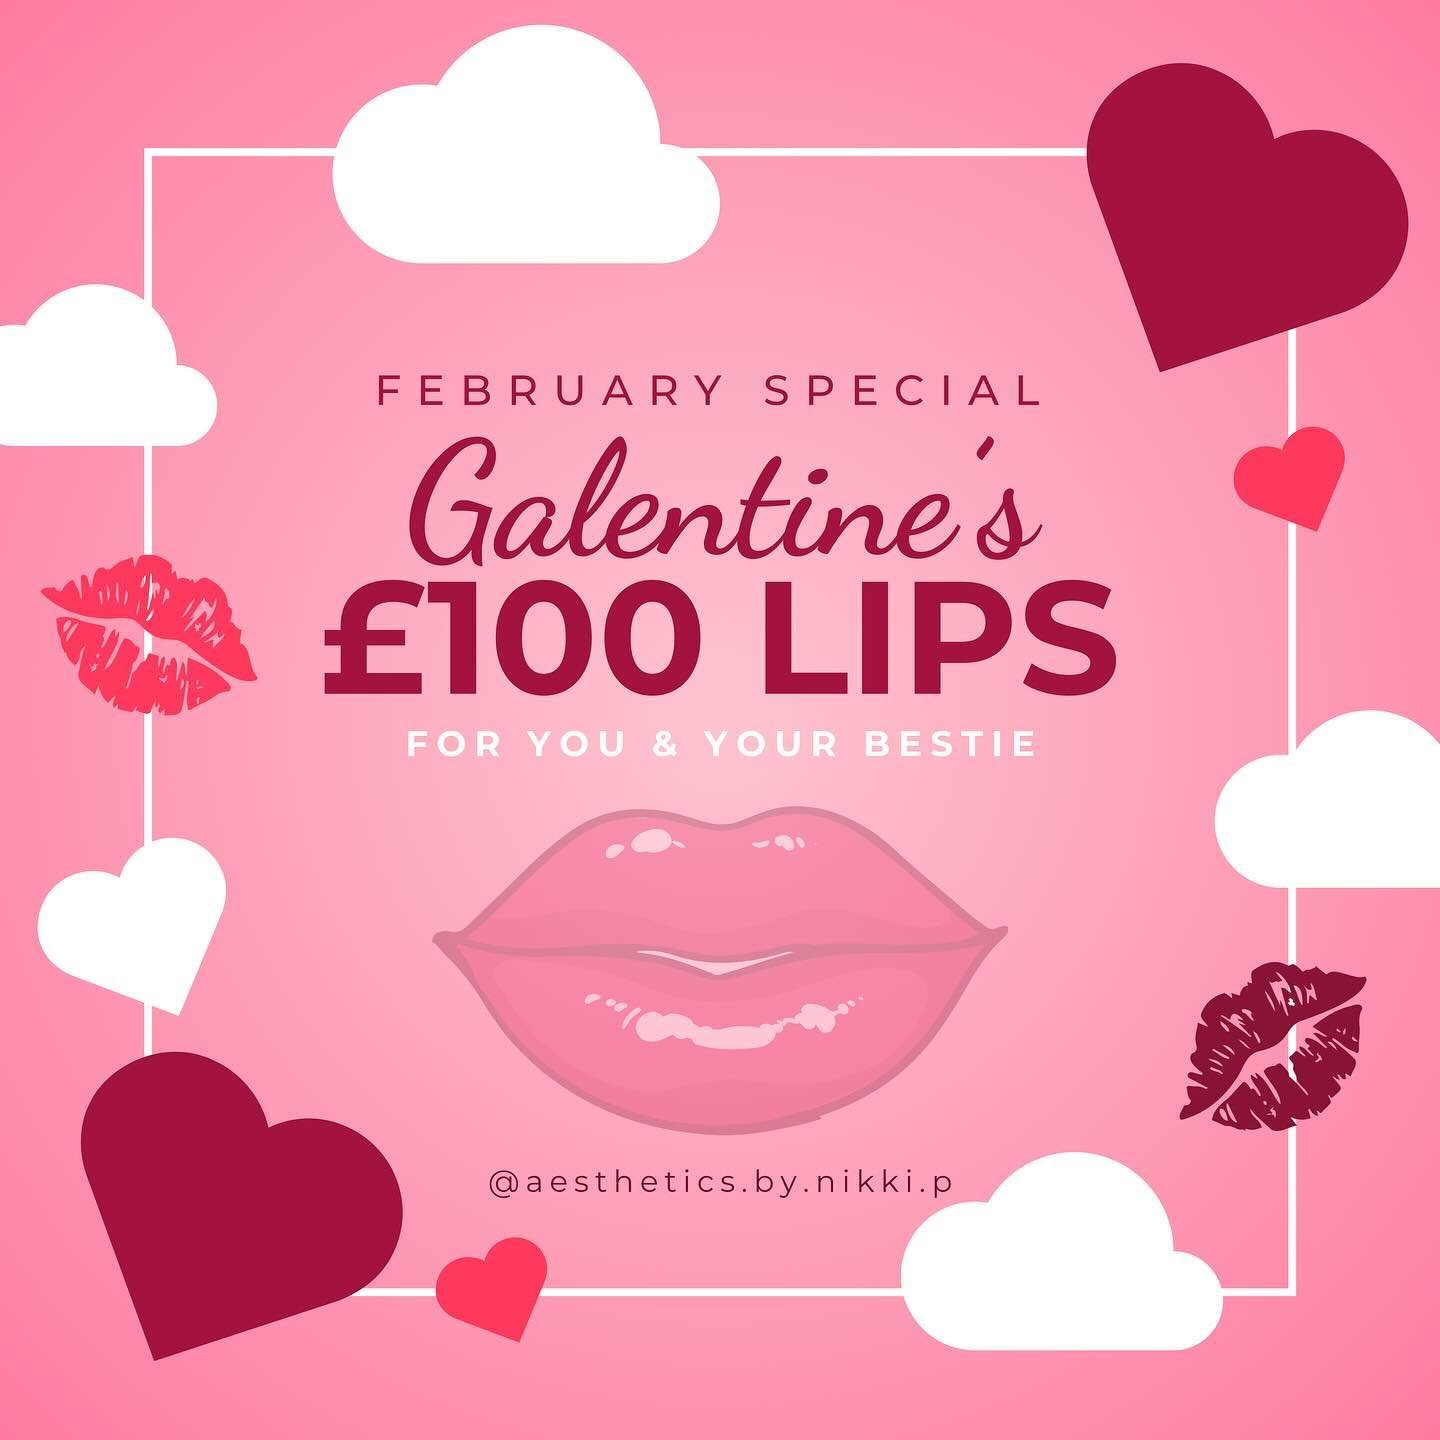 Galentine&rsquo;s Special 👄
Book in with your bestie for &pound;100 lips this February 💖

*** Must book in together - can be different days ***
Simply give the name of your bestie when booking!

Offer between 1st Feb - 29th Feb!
Simply message me t